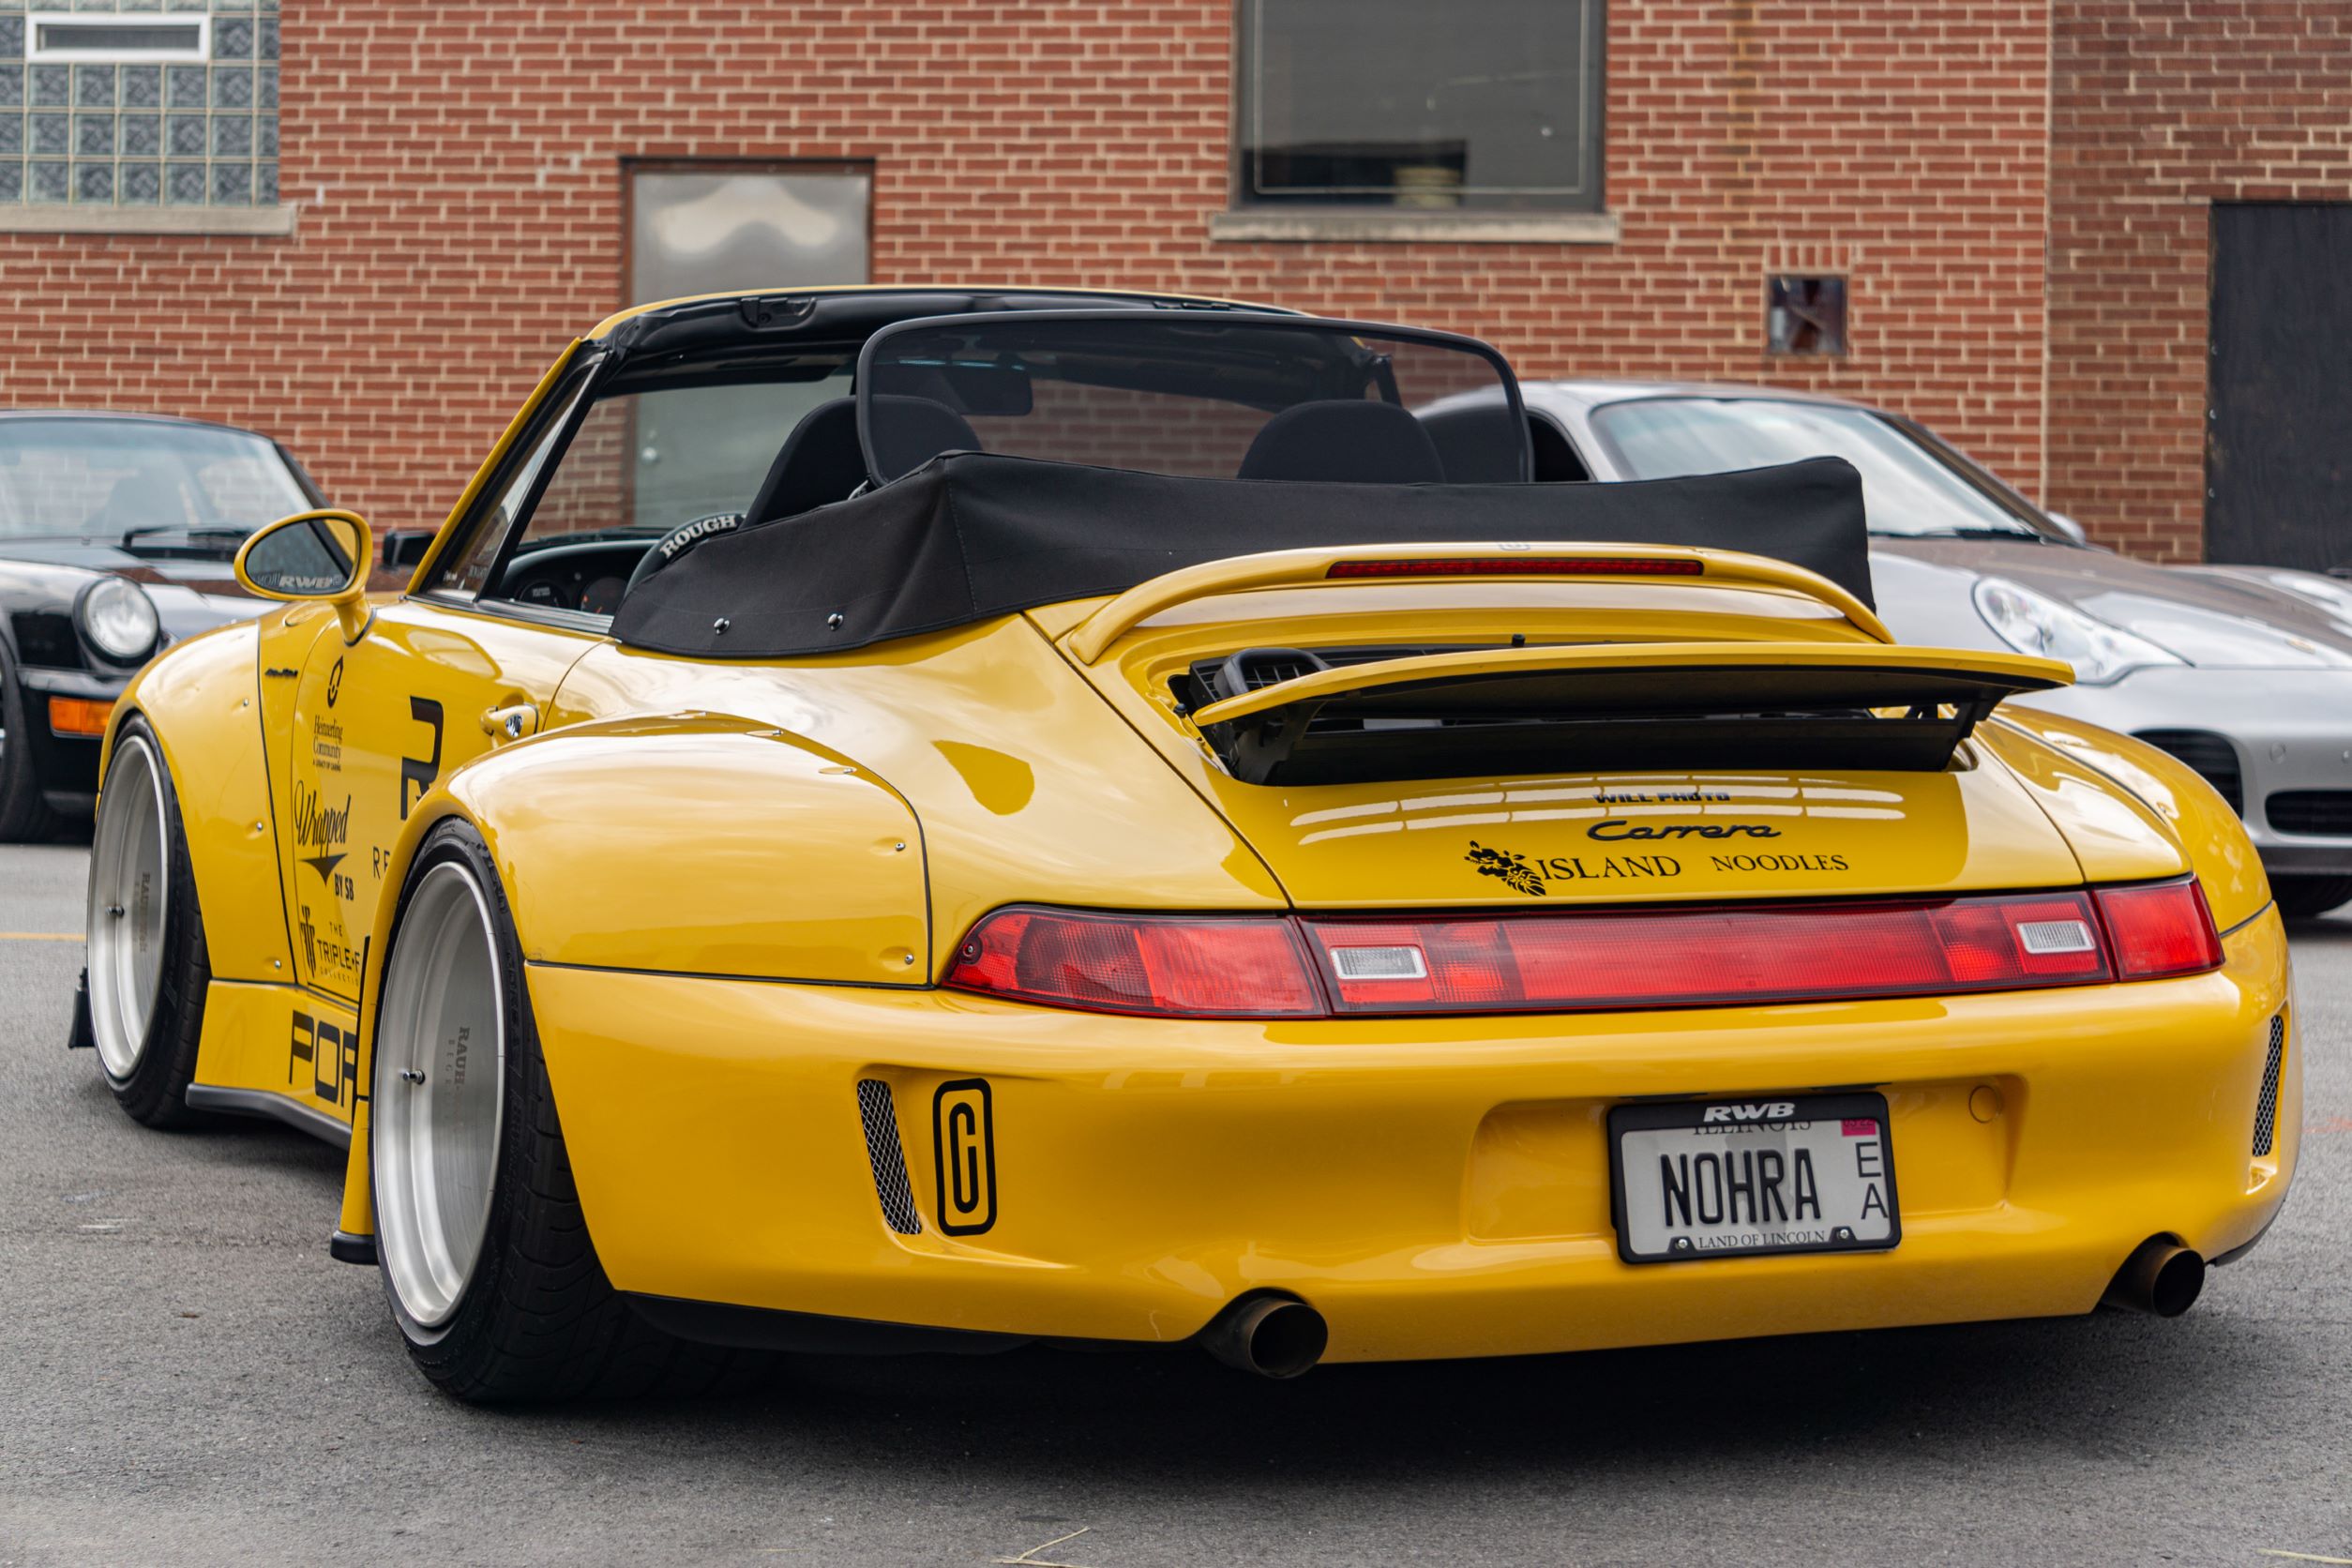 The rear view of the yellow-and-black RWB Porsche 993 911 Cabriolet 'Nohra'